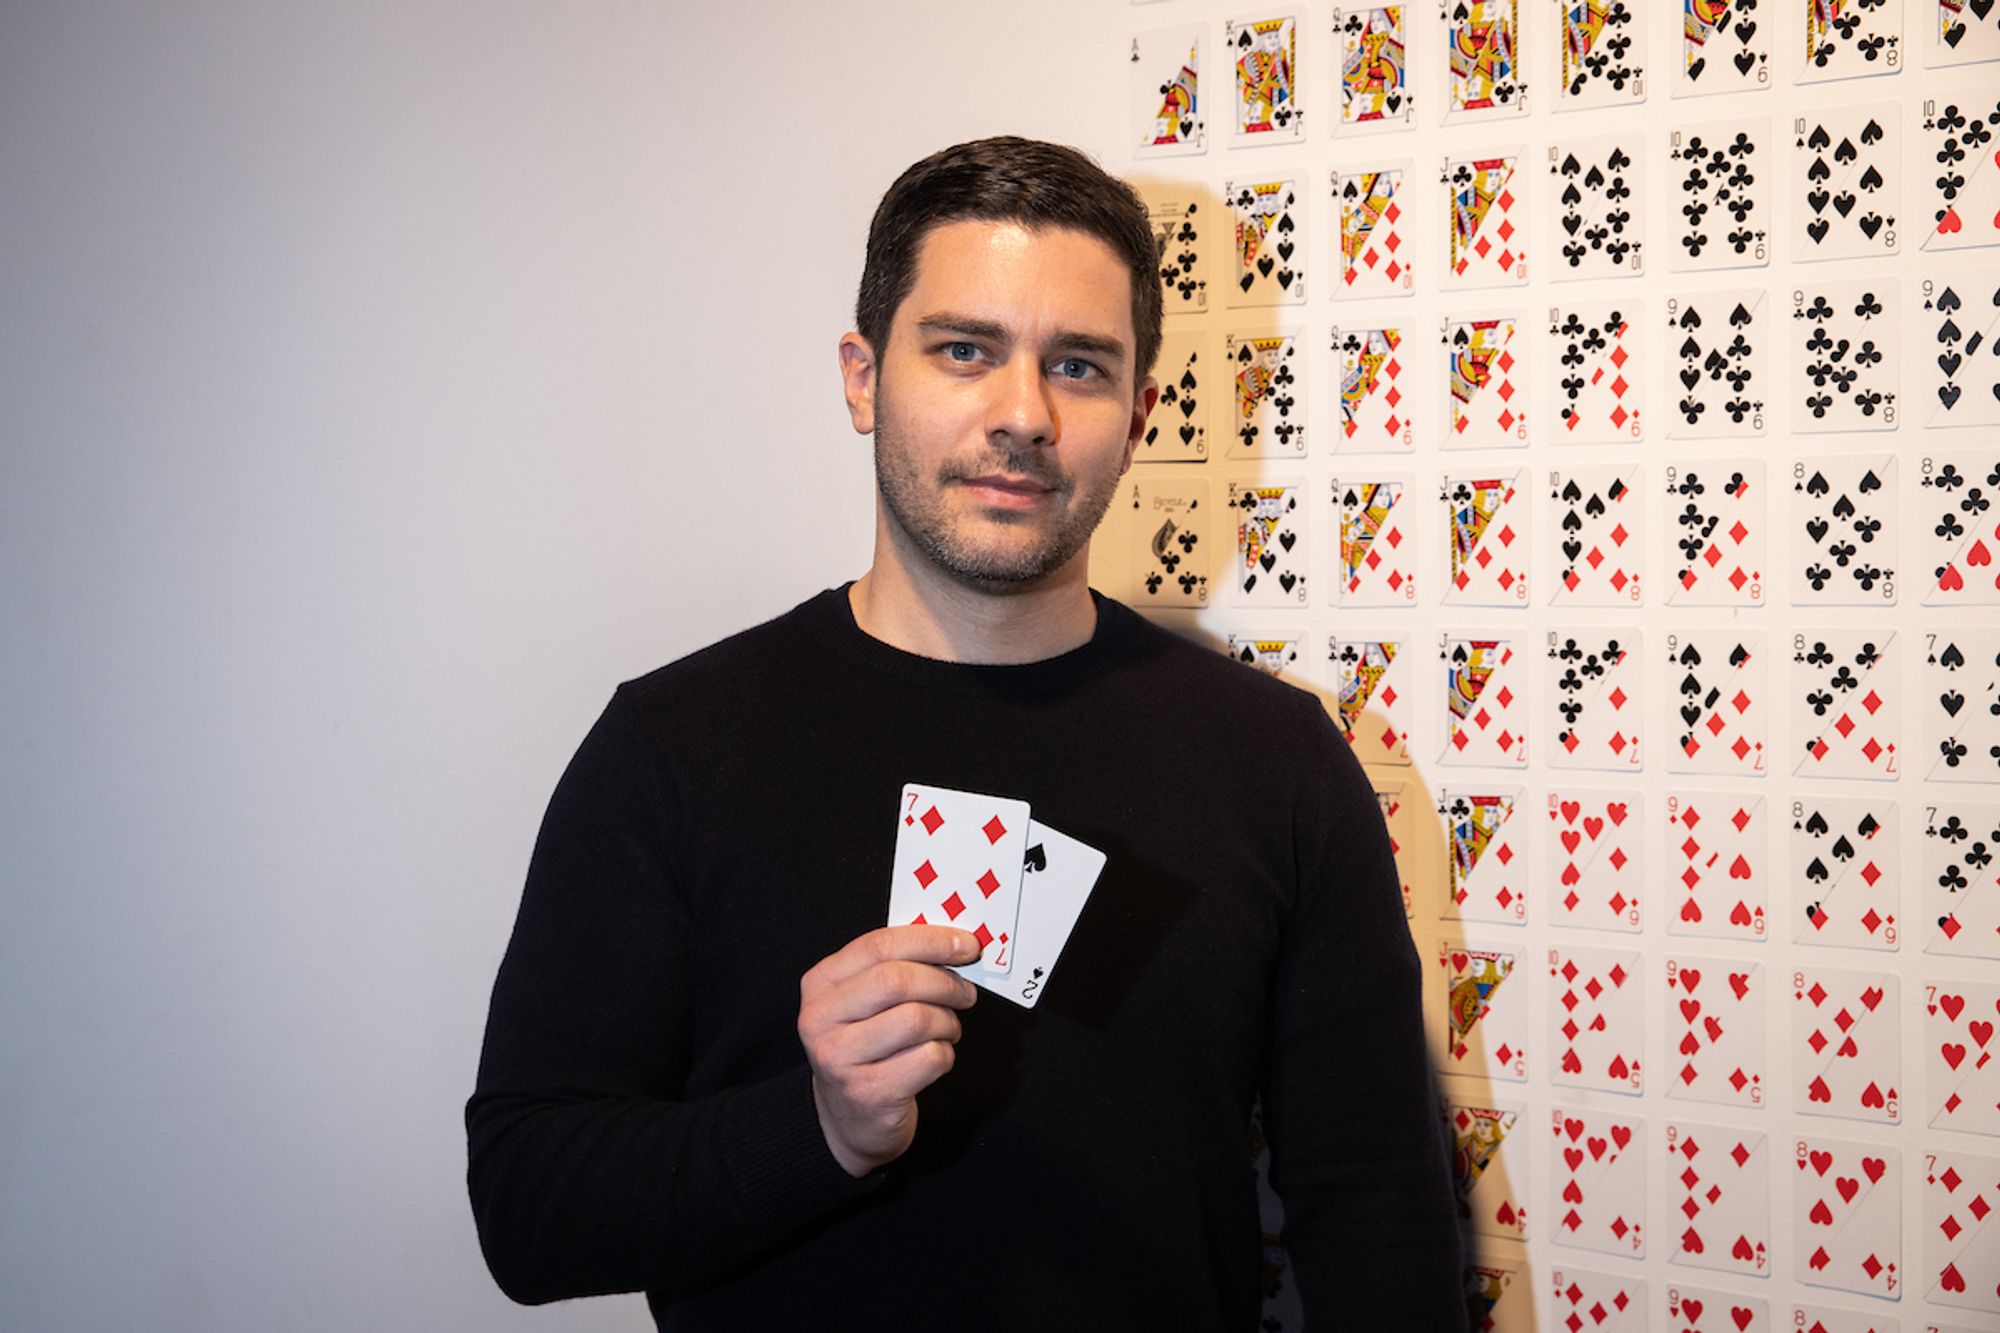 White man holding playing cards